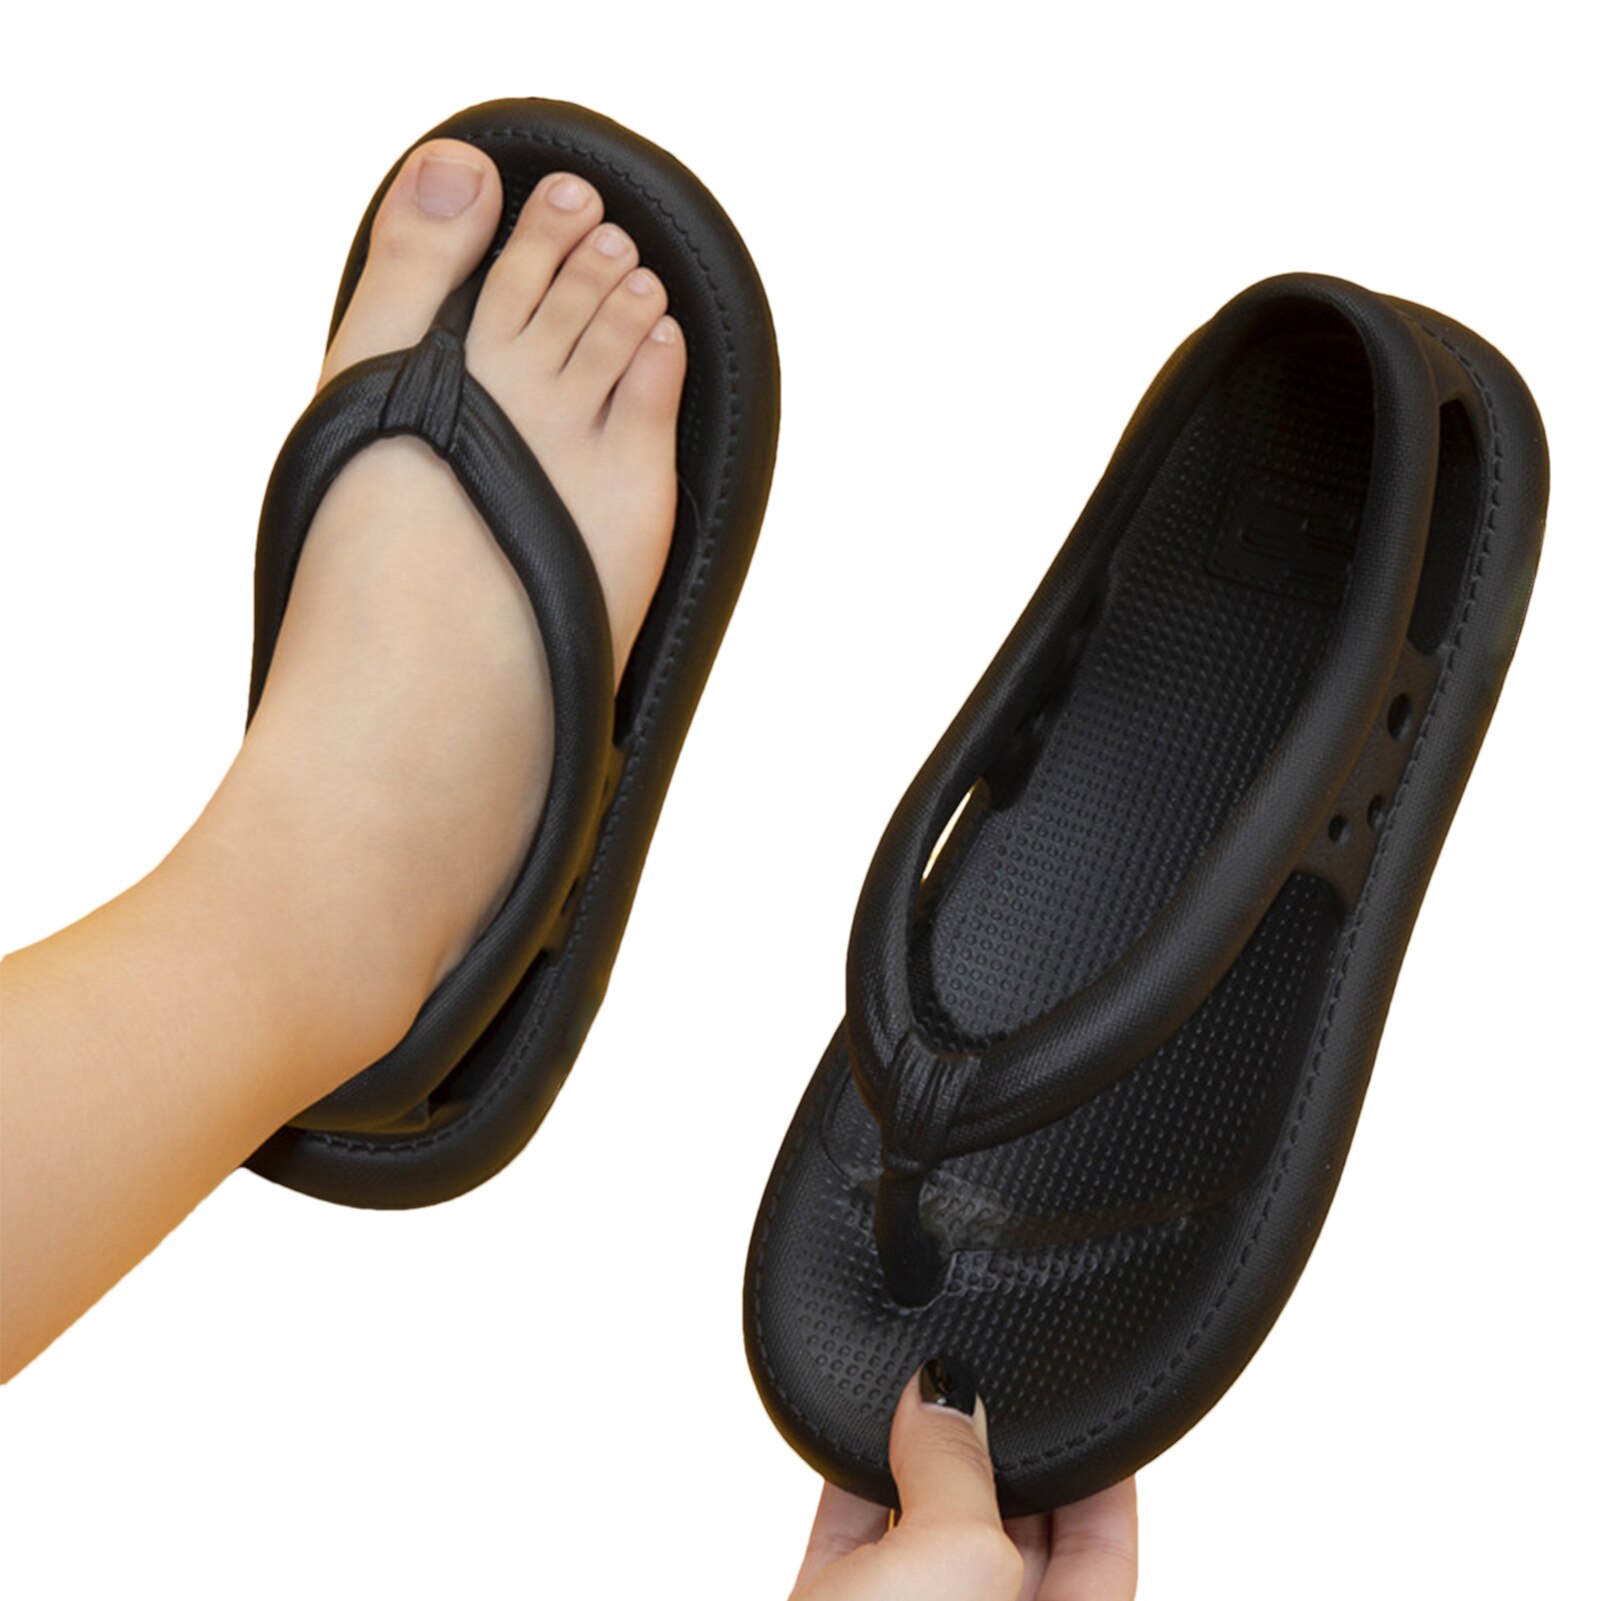 Sandals EVA Thick Bottom Sole Non Slip Quick-Dry Flip-Flop Outdoor Beach Bathroom Slippers New Slides For Women And Men